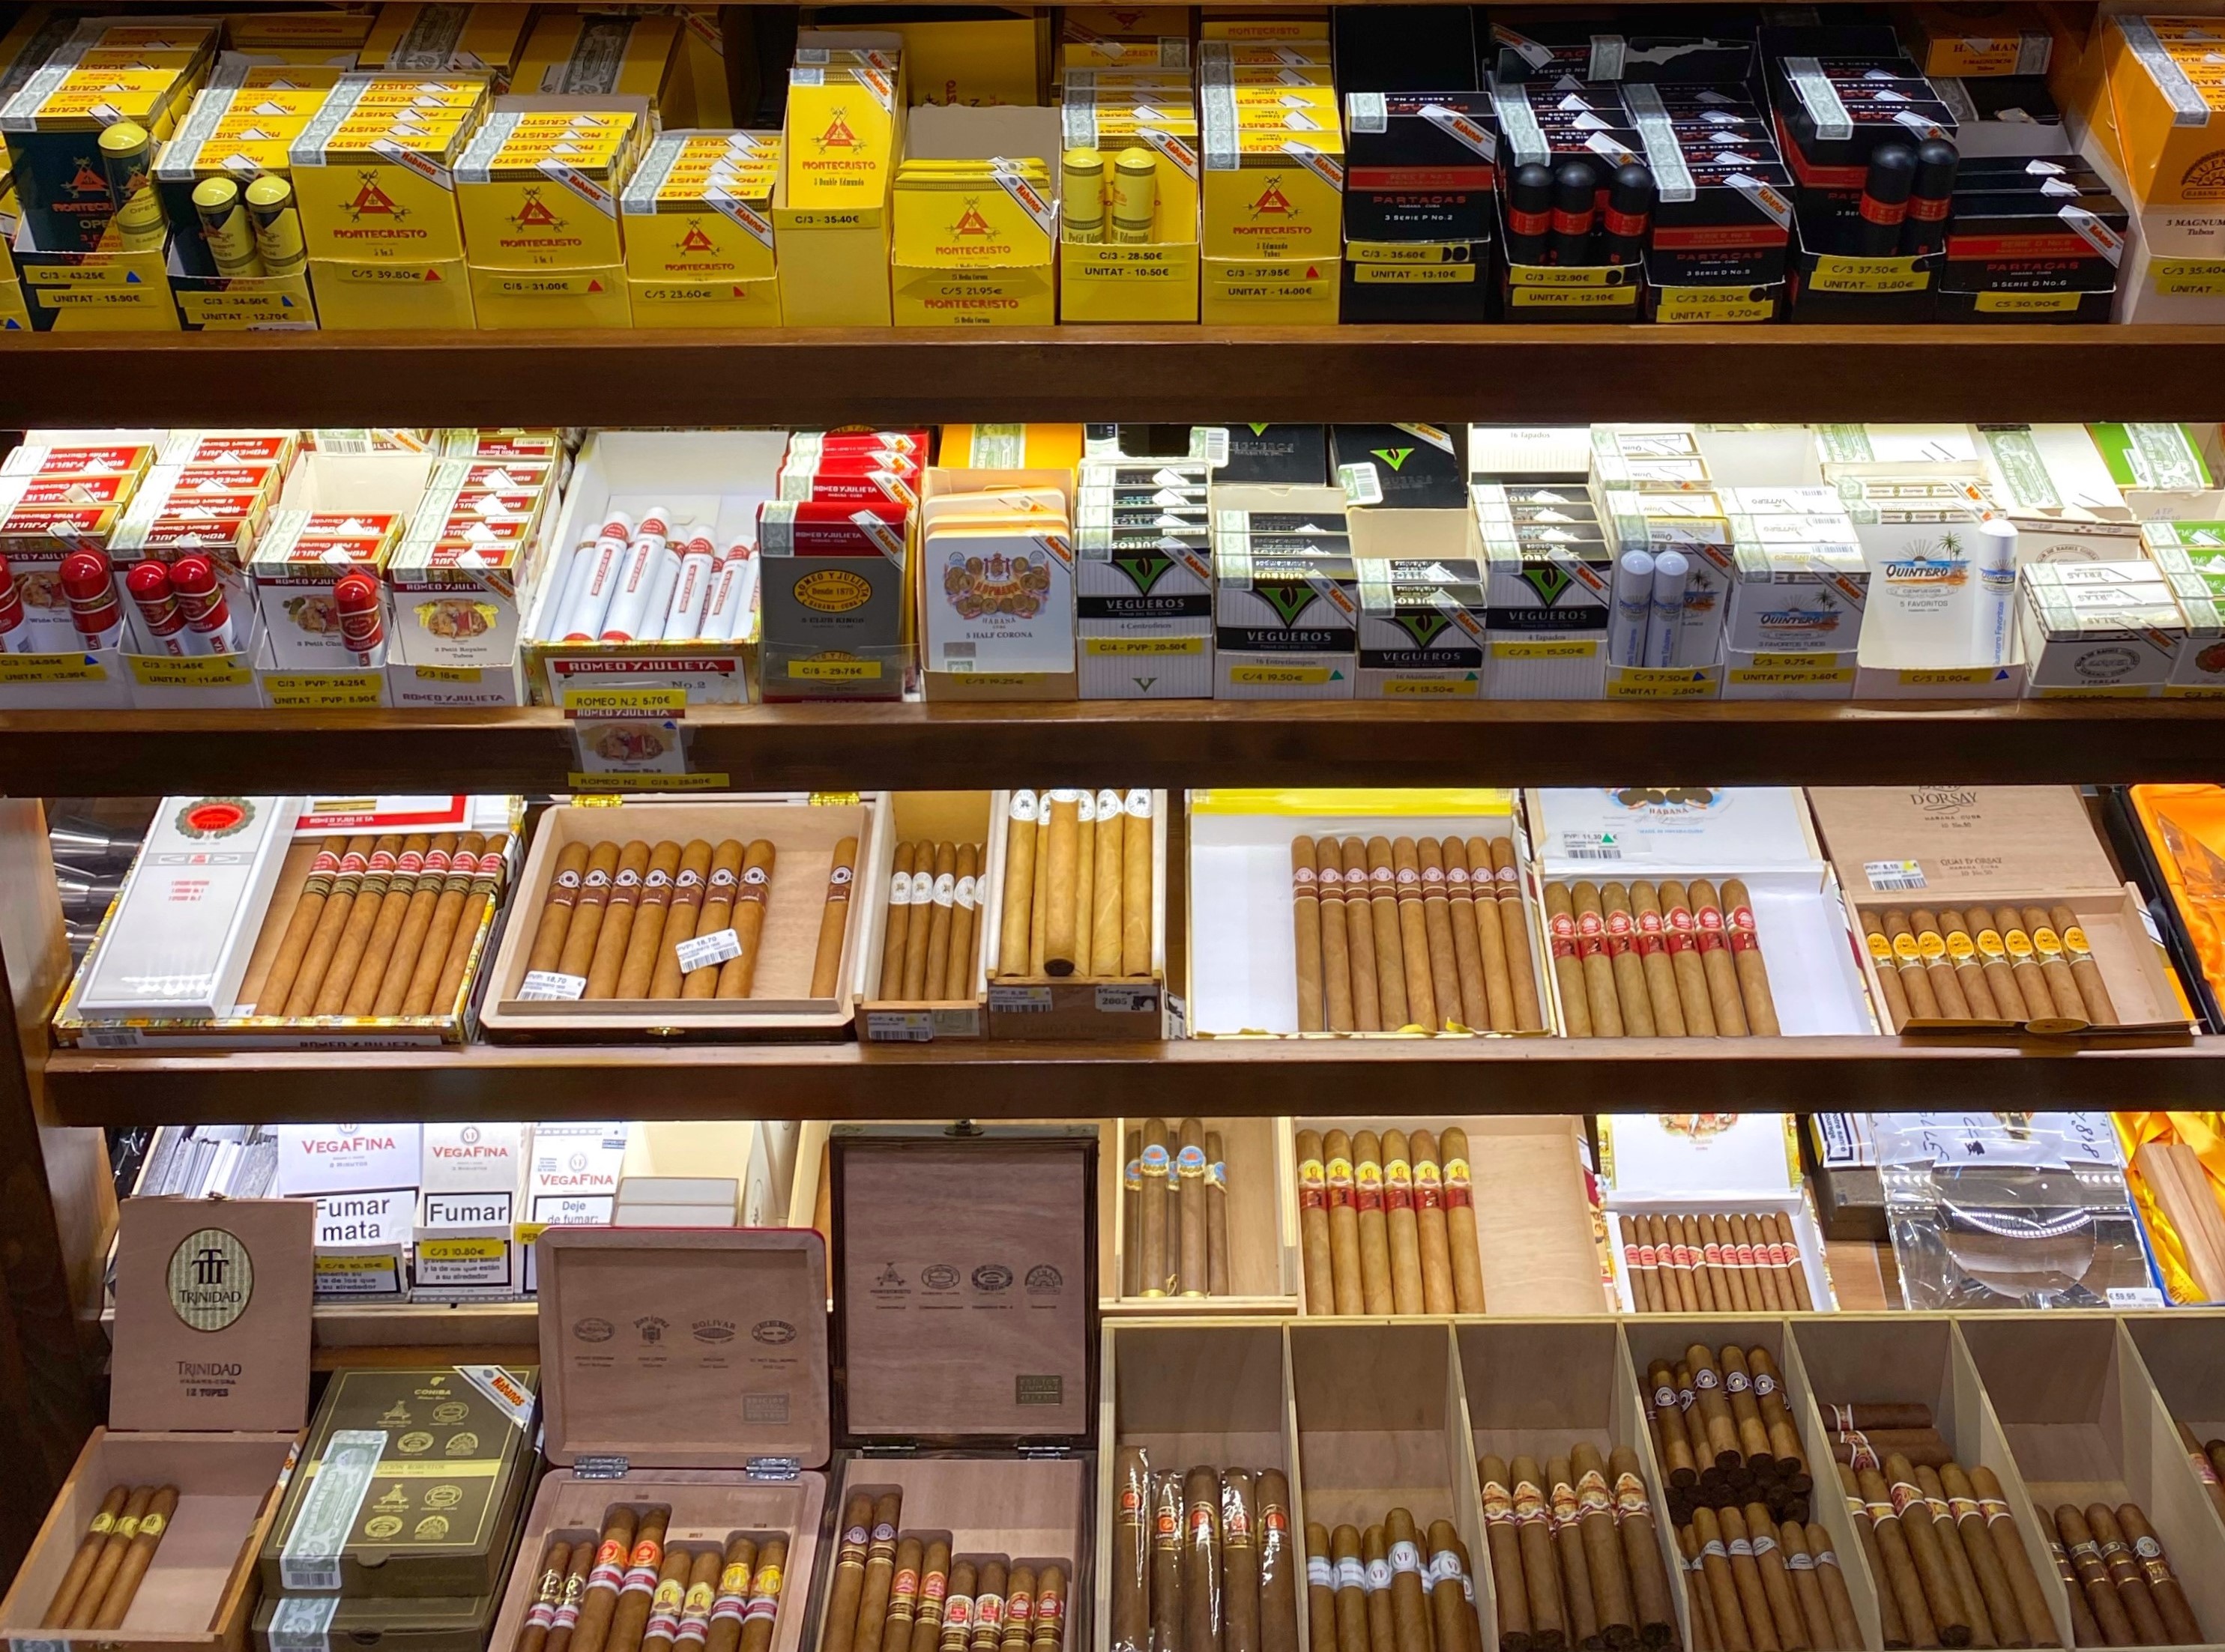 The best selection of cigars